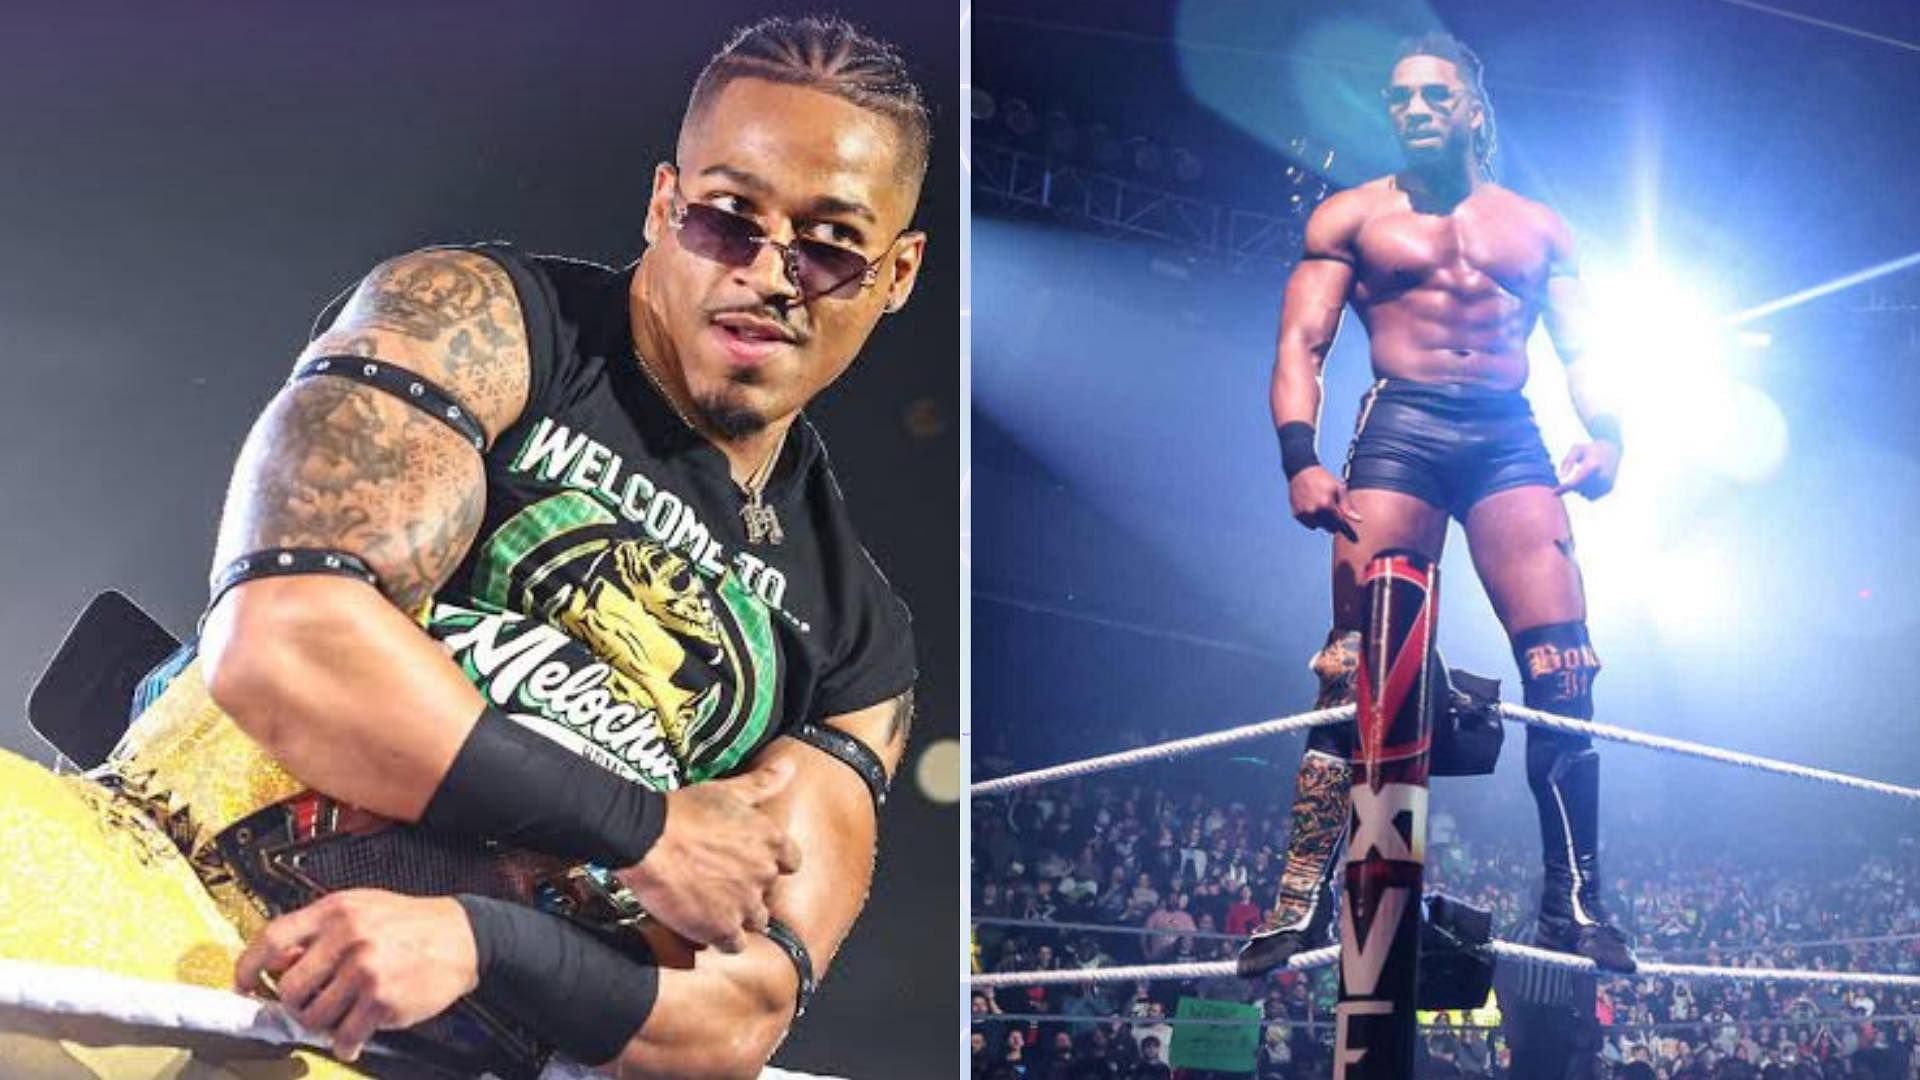 Carmelo Hayes surprised everybody at WWE NXT Vengeance Day